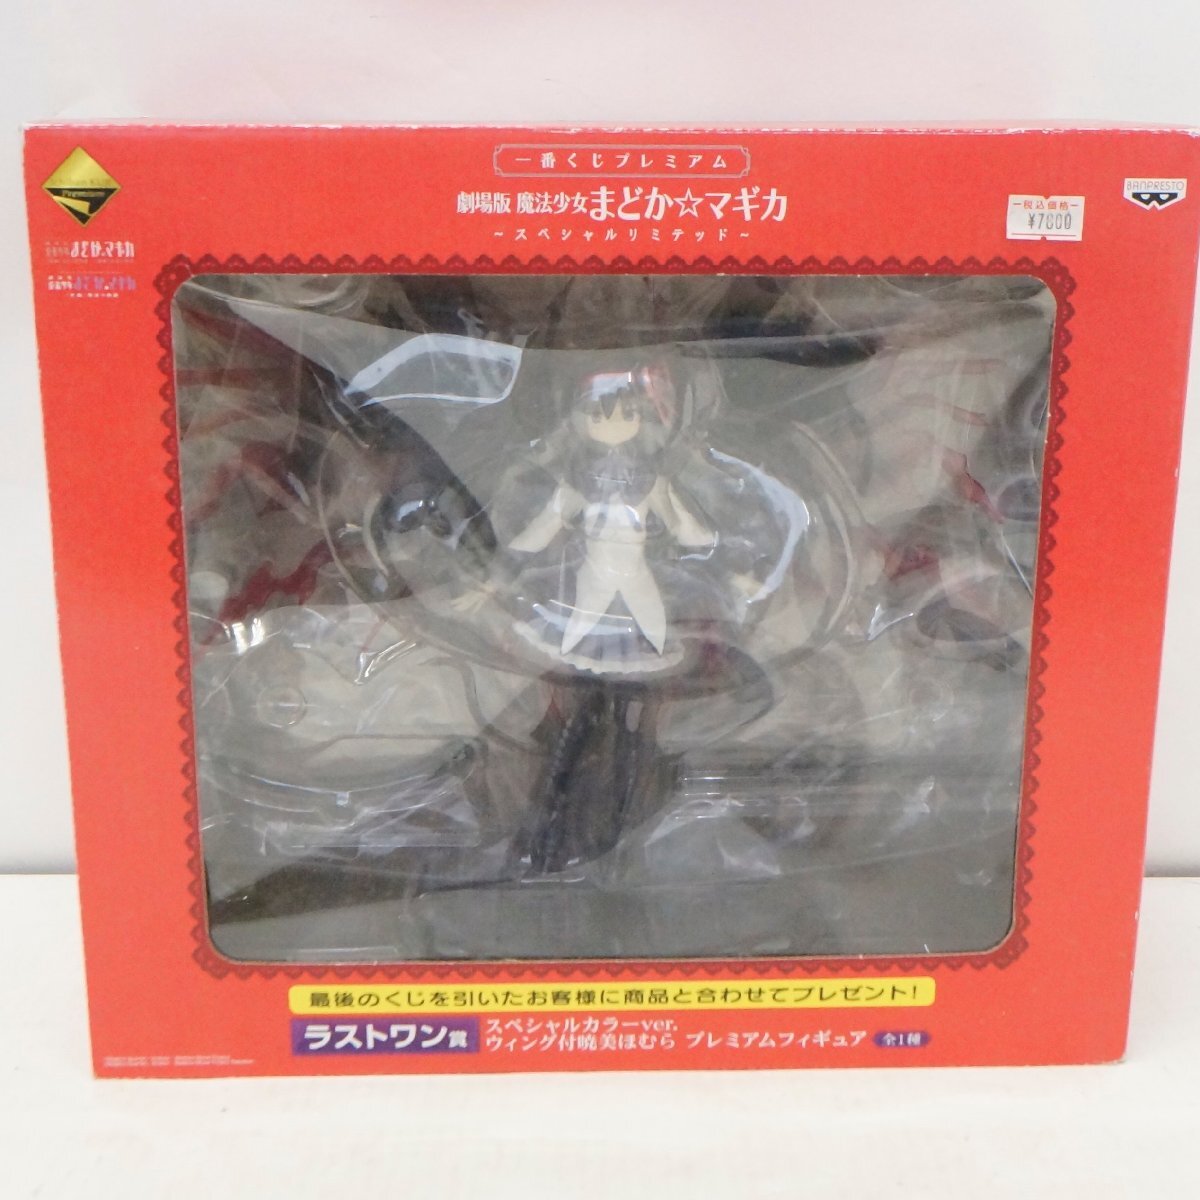  used theater version magic young lady ...* Magi ka special limited 1 number lot premium last one . figure special color wing attaching . beautiful 